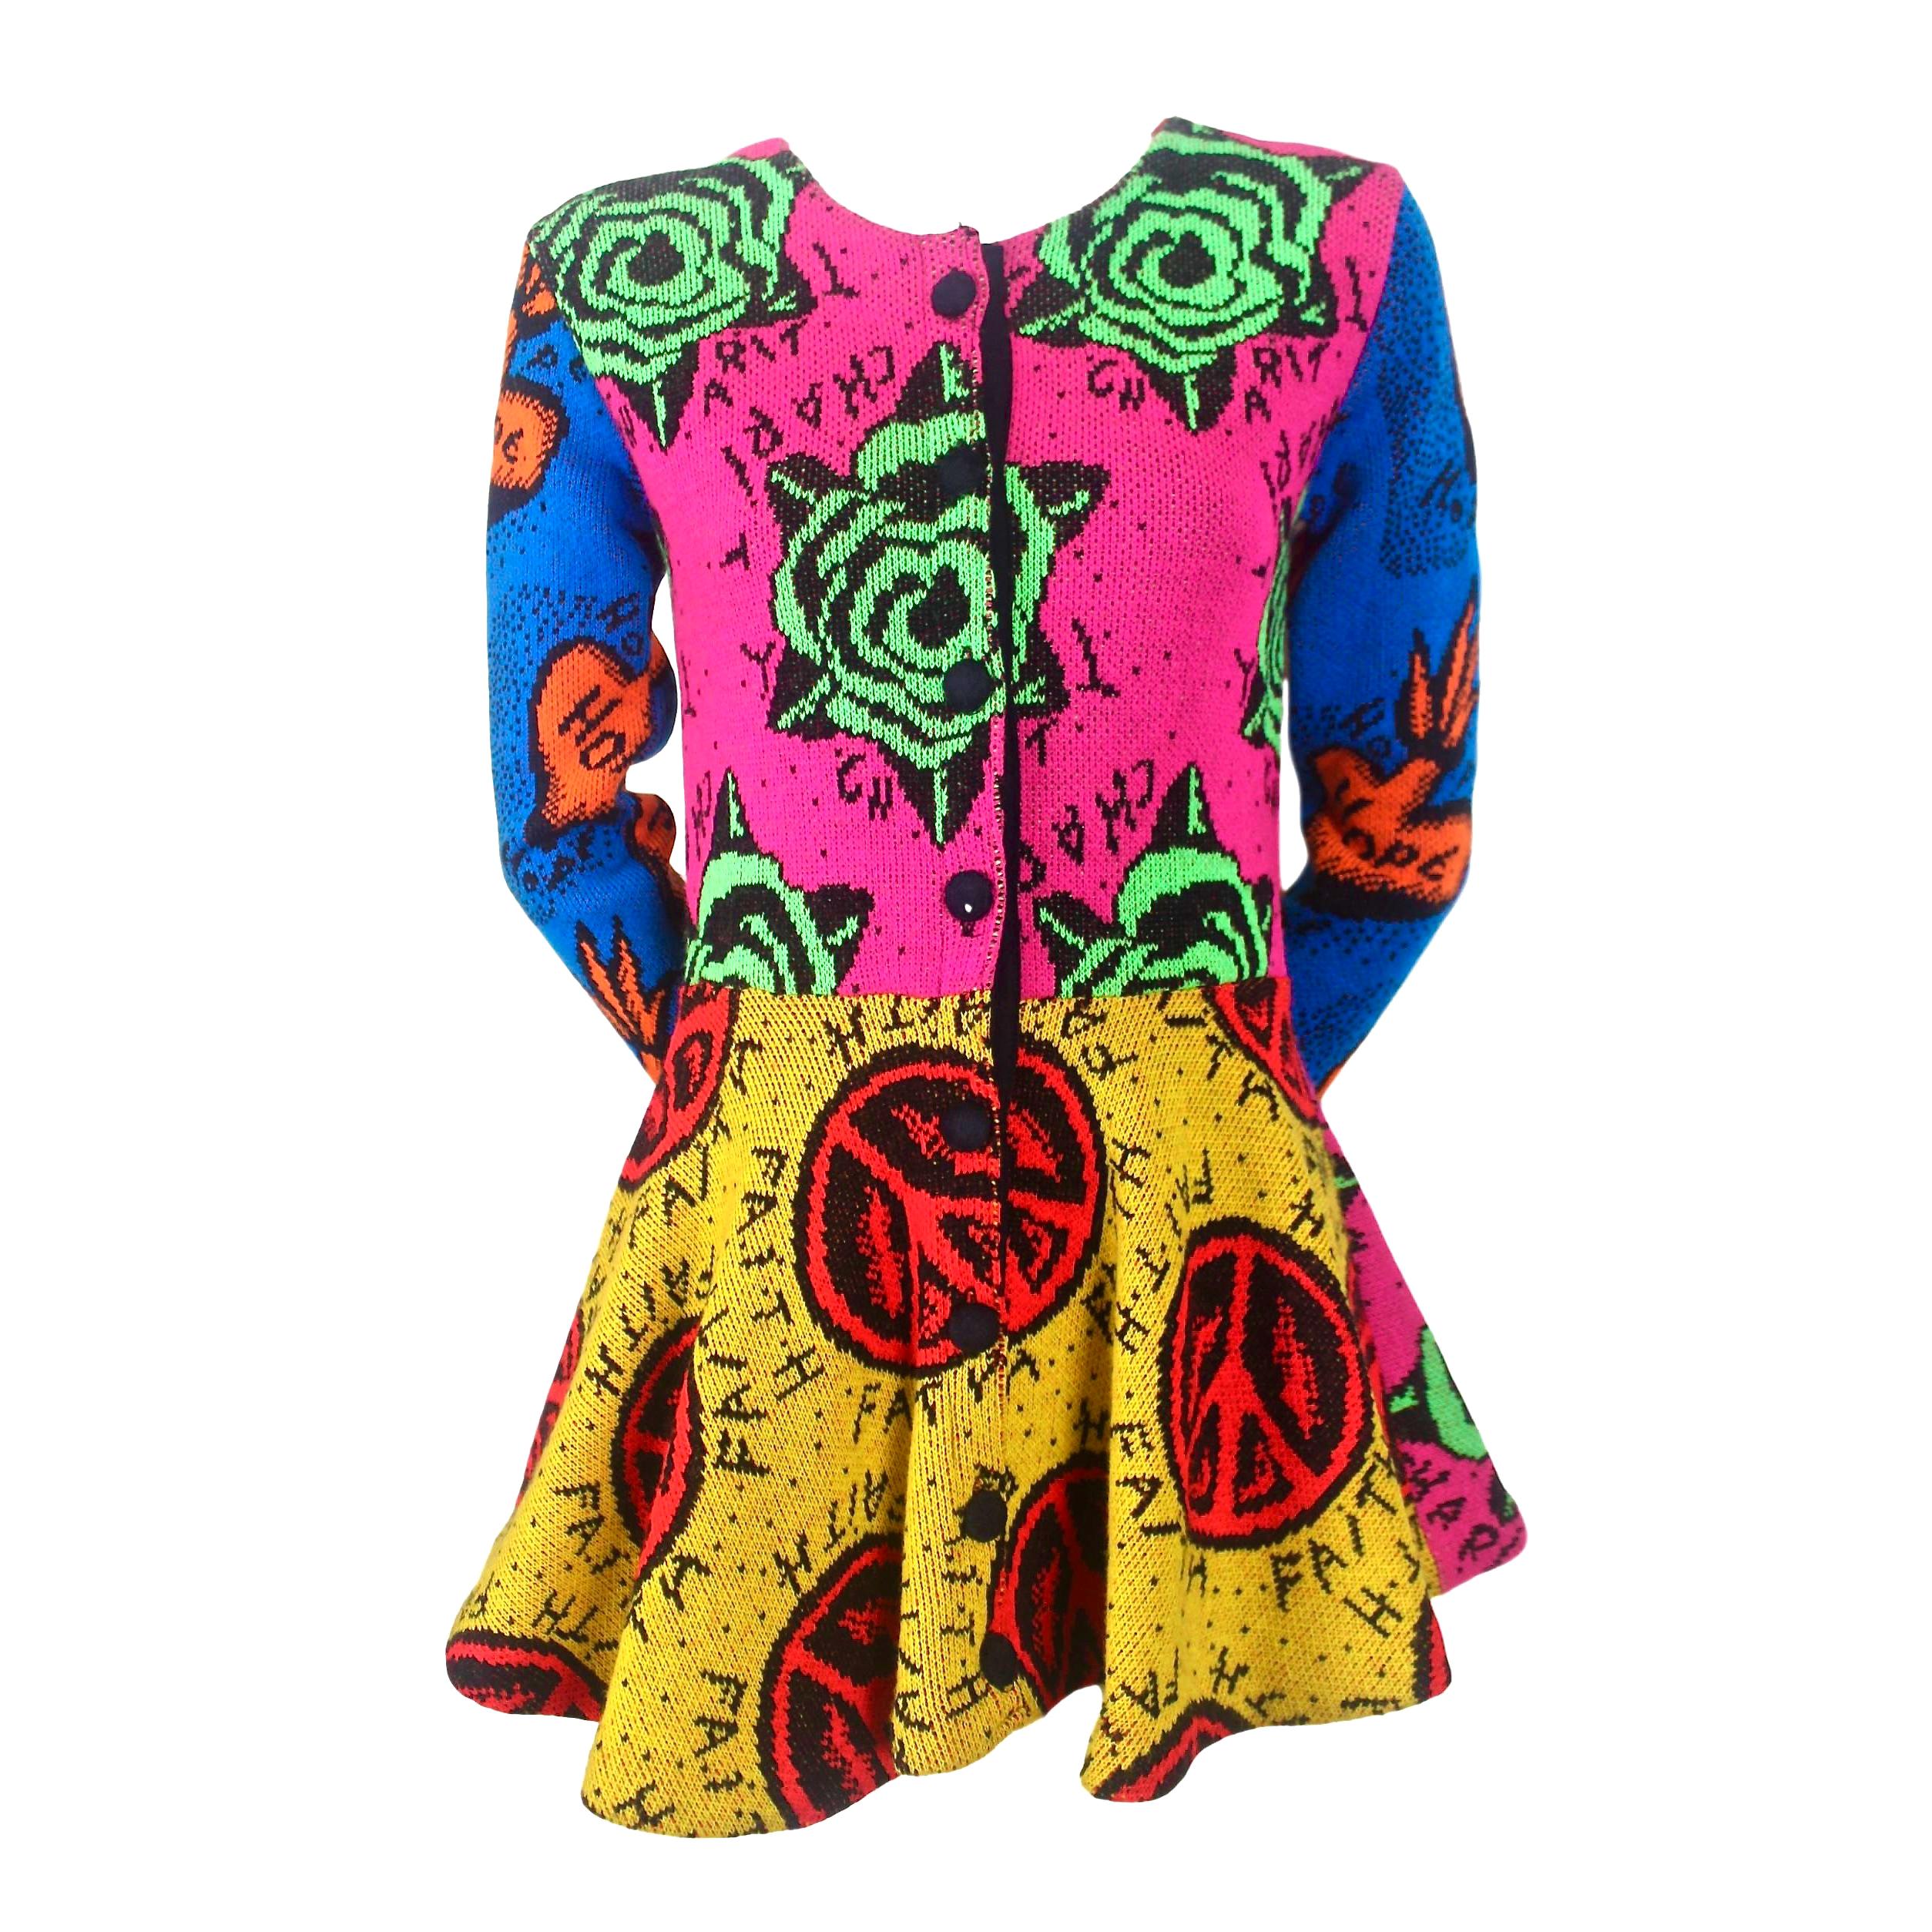 Original Betsey Johnson Colourful Peplum Knit Jacket Faith, Hope and Charity For Sale